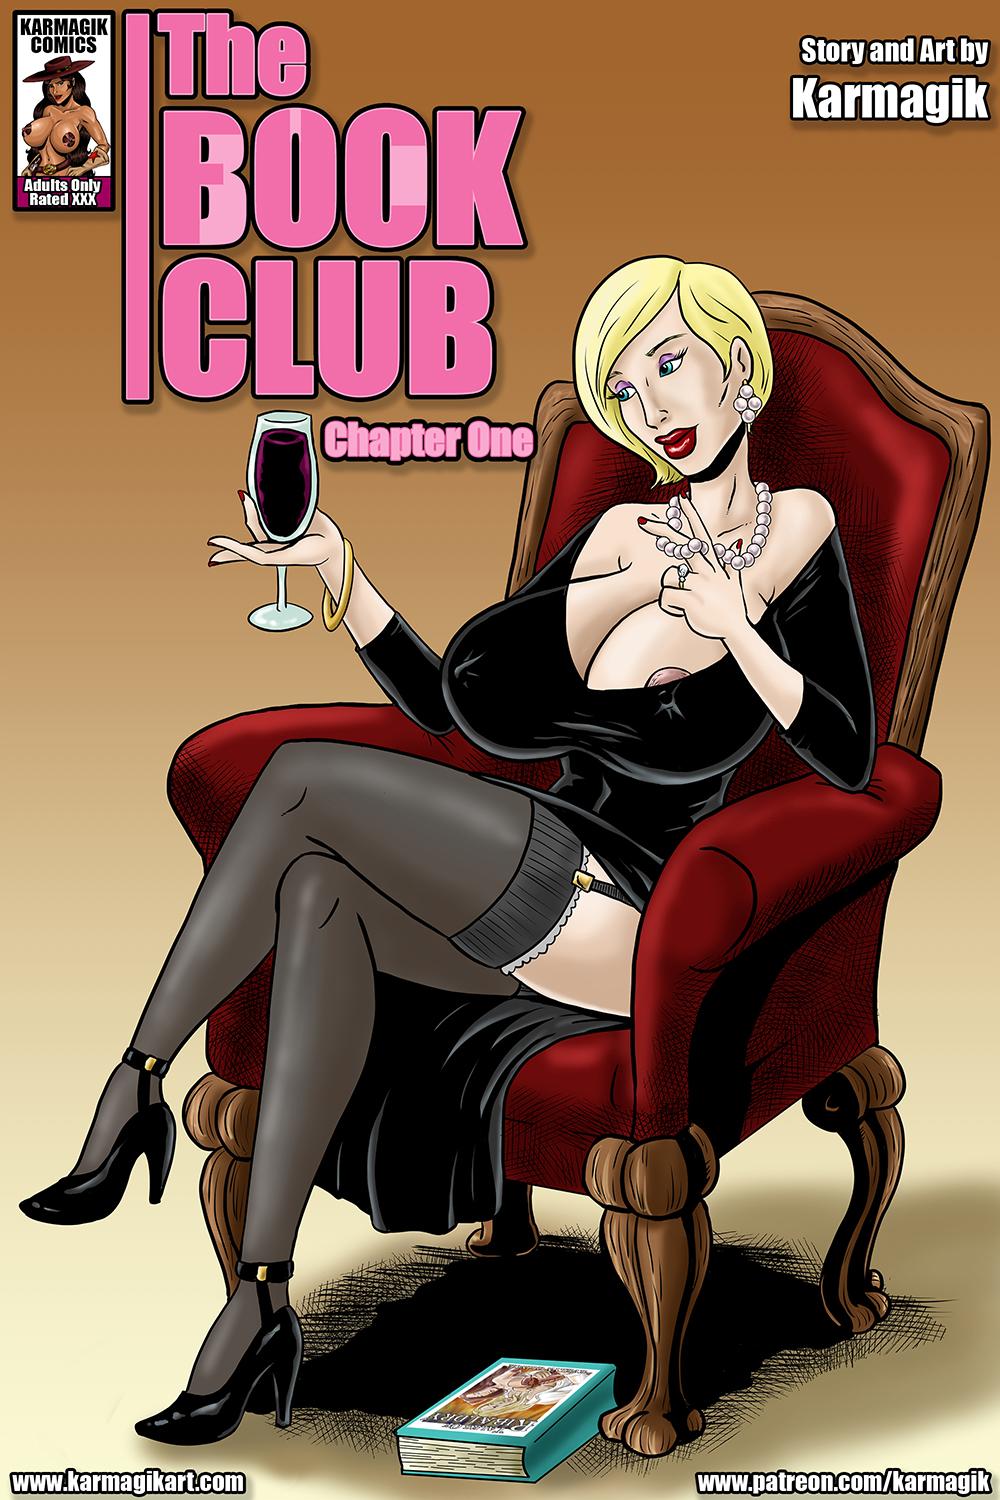 Update The Book Club Ch. 1-2 from Karmagik